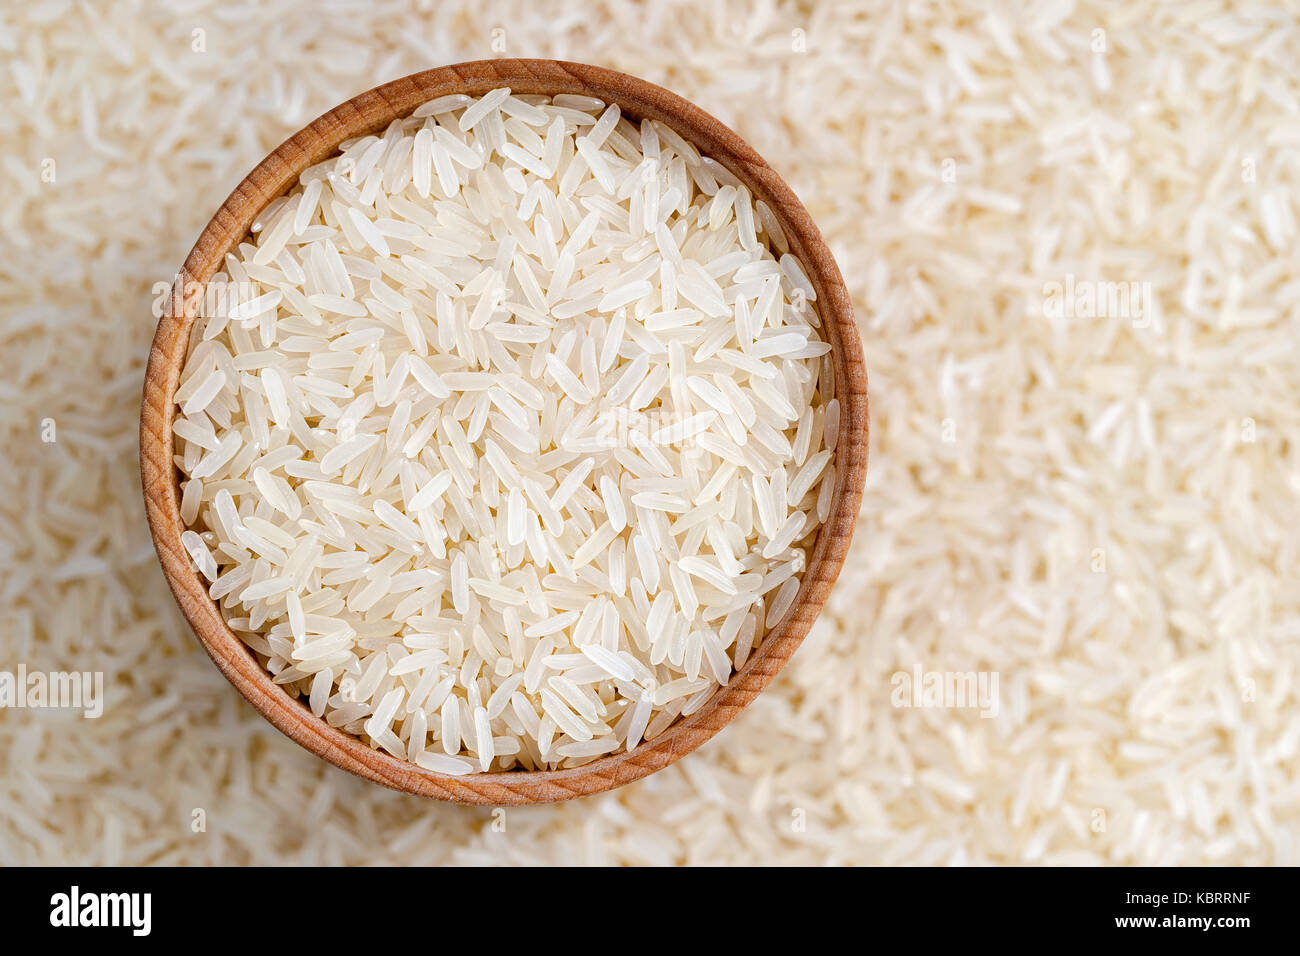 Healthy food. Wooden bowl filled long parboiled rice on blurred background. Close up, top view, high resolution product. Stock Photo